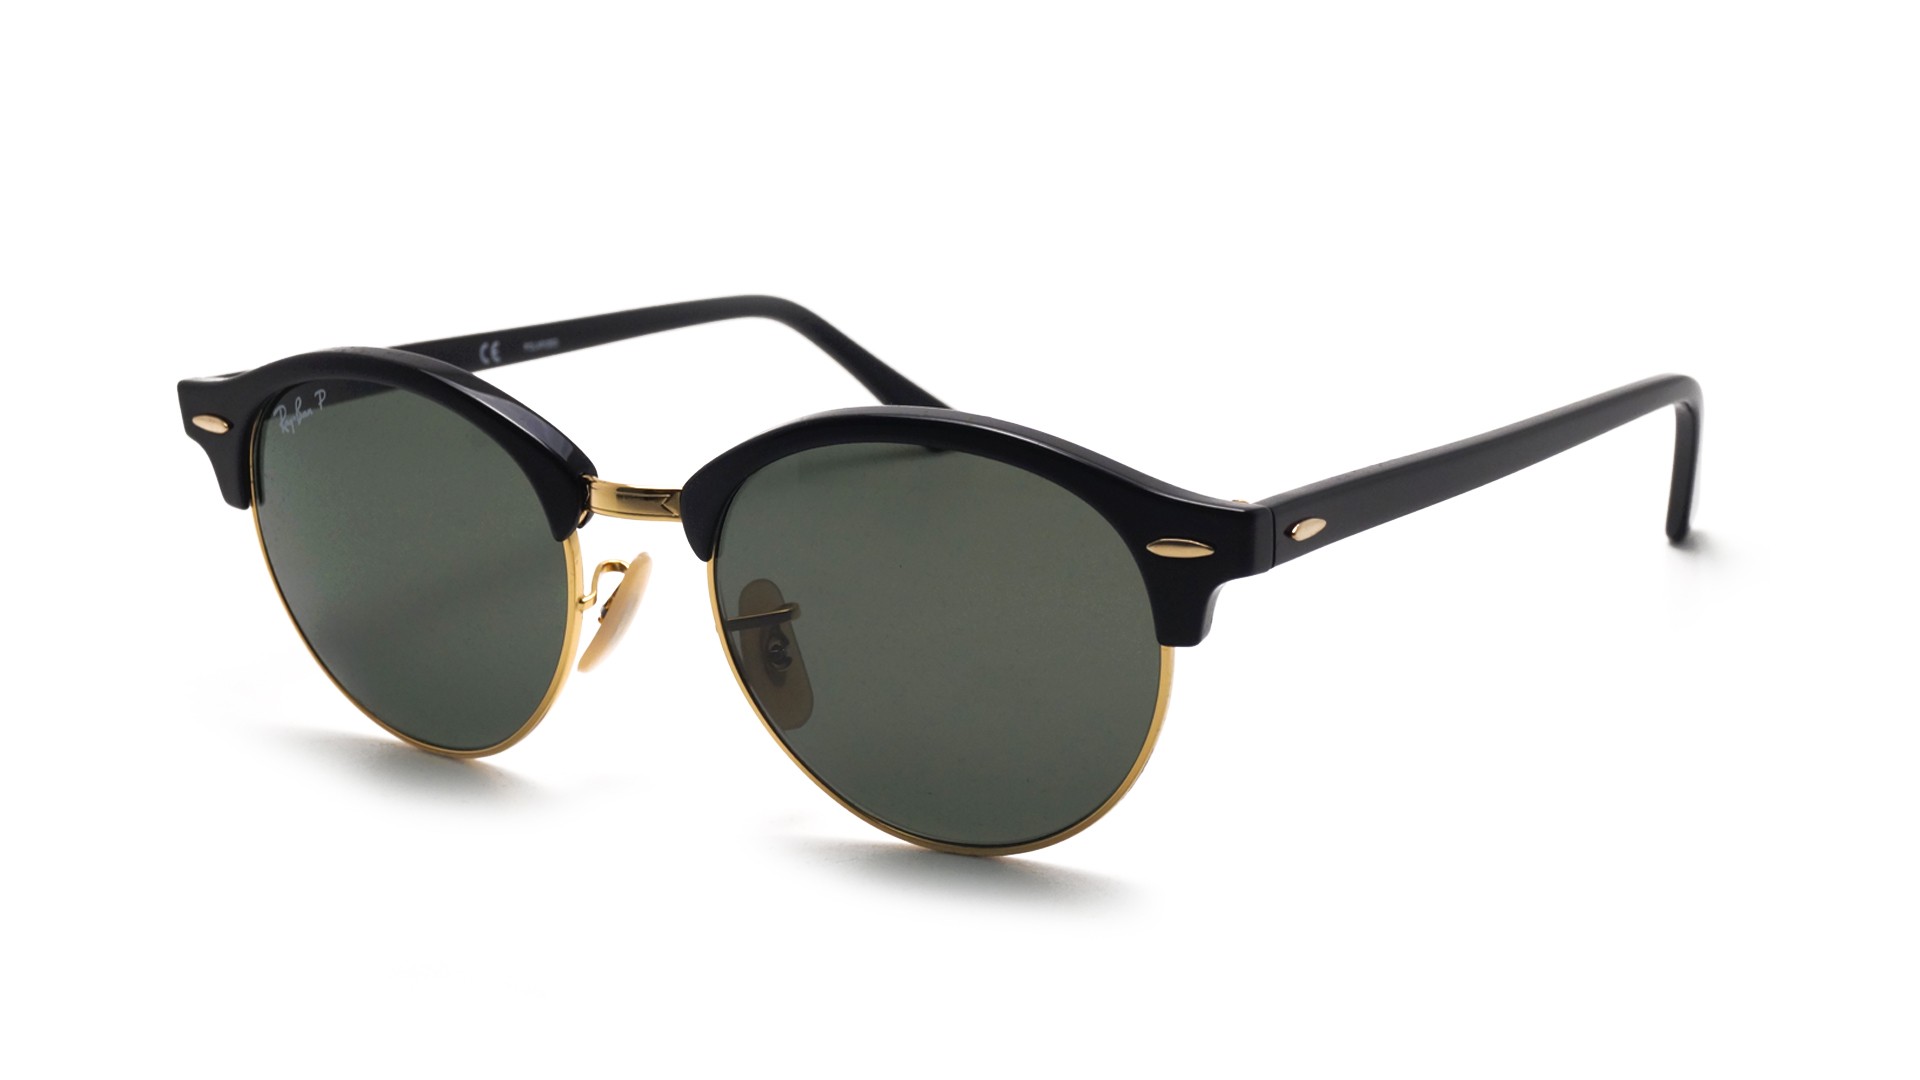 Ray-Ban Clubround Black RB4246 901/58 